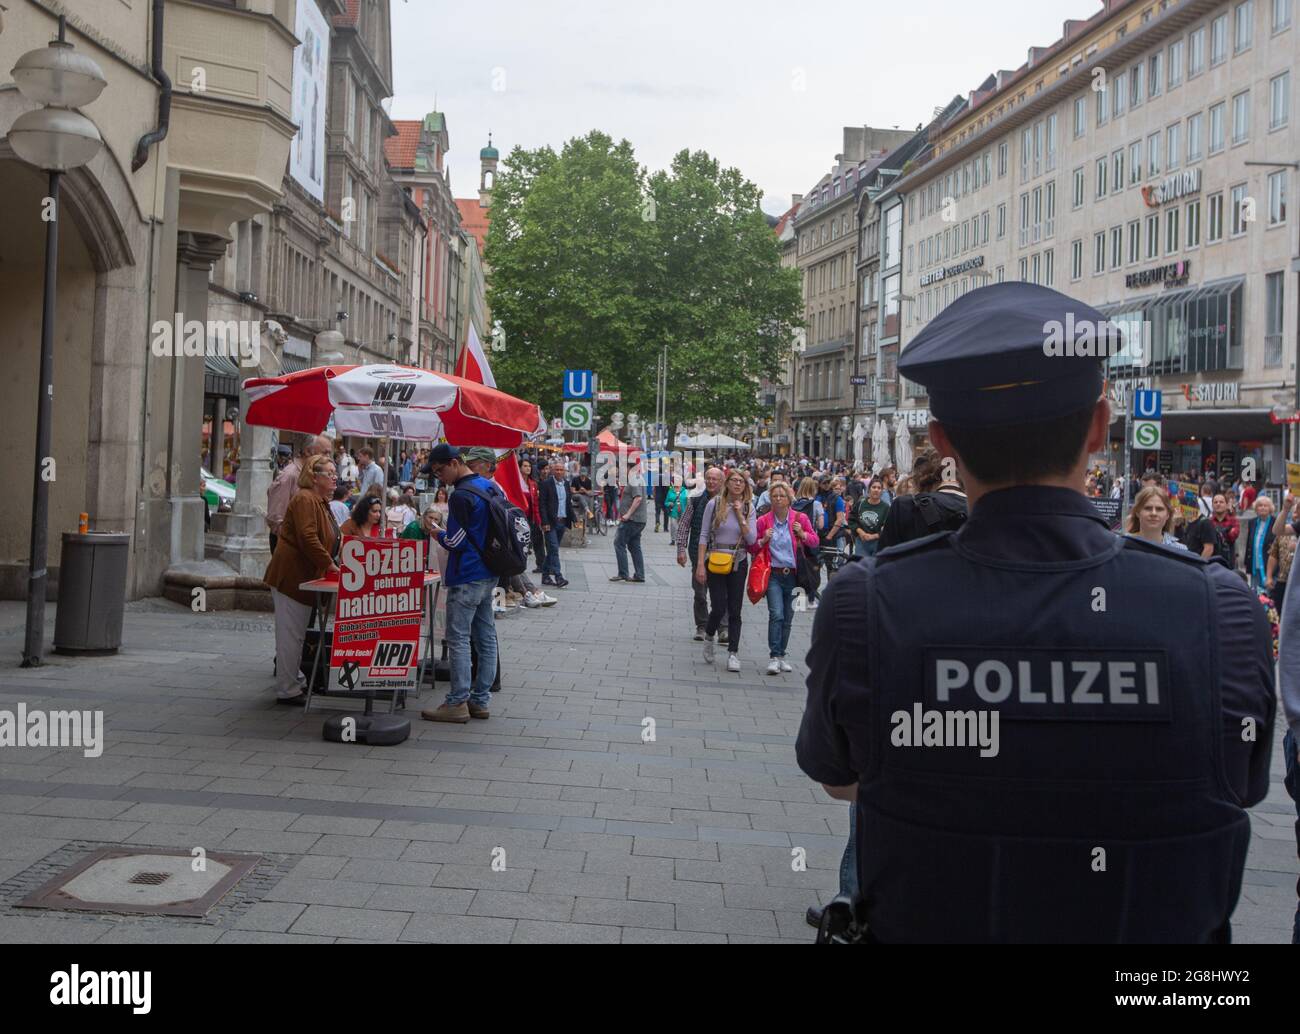 Munich, Germany. 25th May, 2019. Police watching the NPD. The neonazi party NPD had a stand in Munich for the upcoming European Elections. (Photo by Alexander Pohl/Sipa USA) Credit: Sipa USA/Alamy Live News Stock Photo